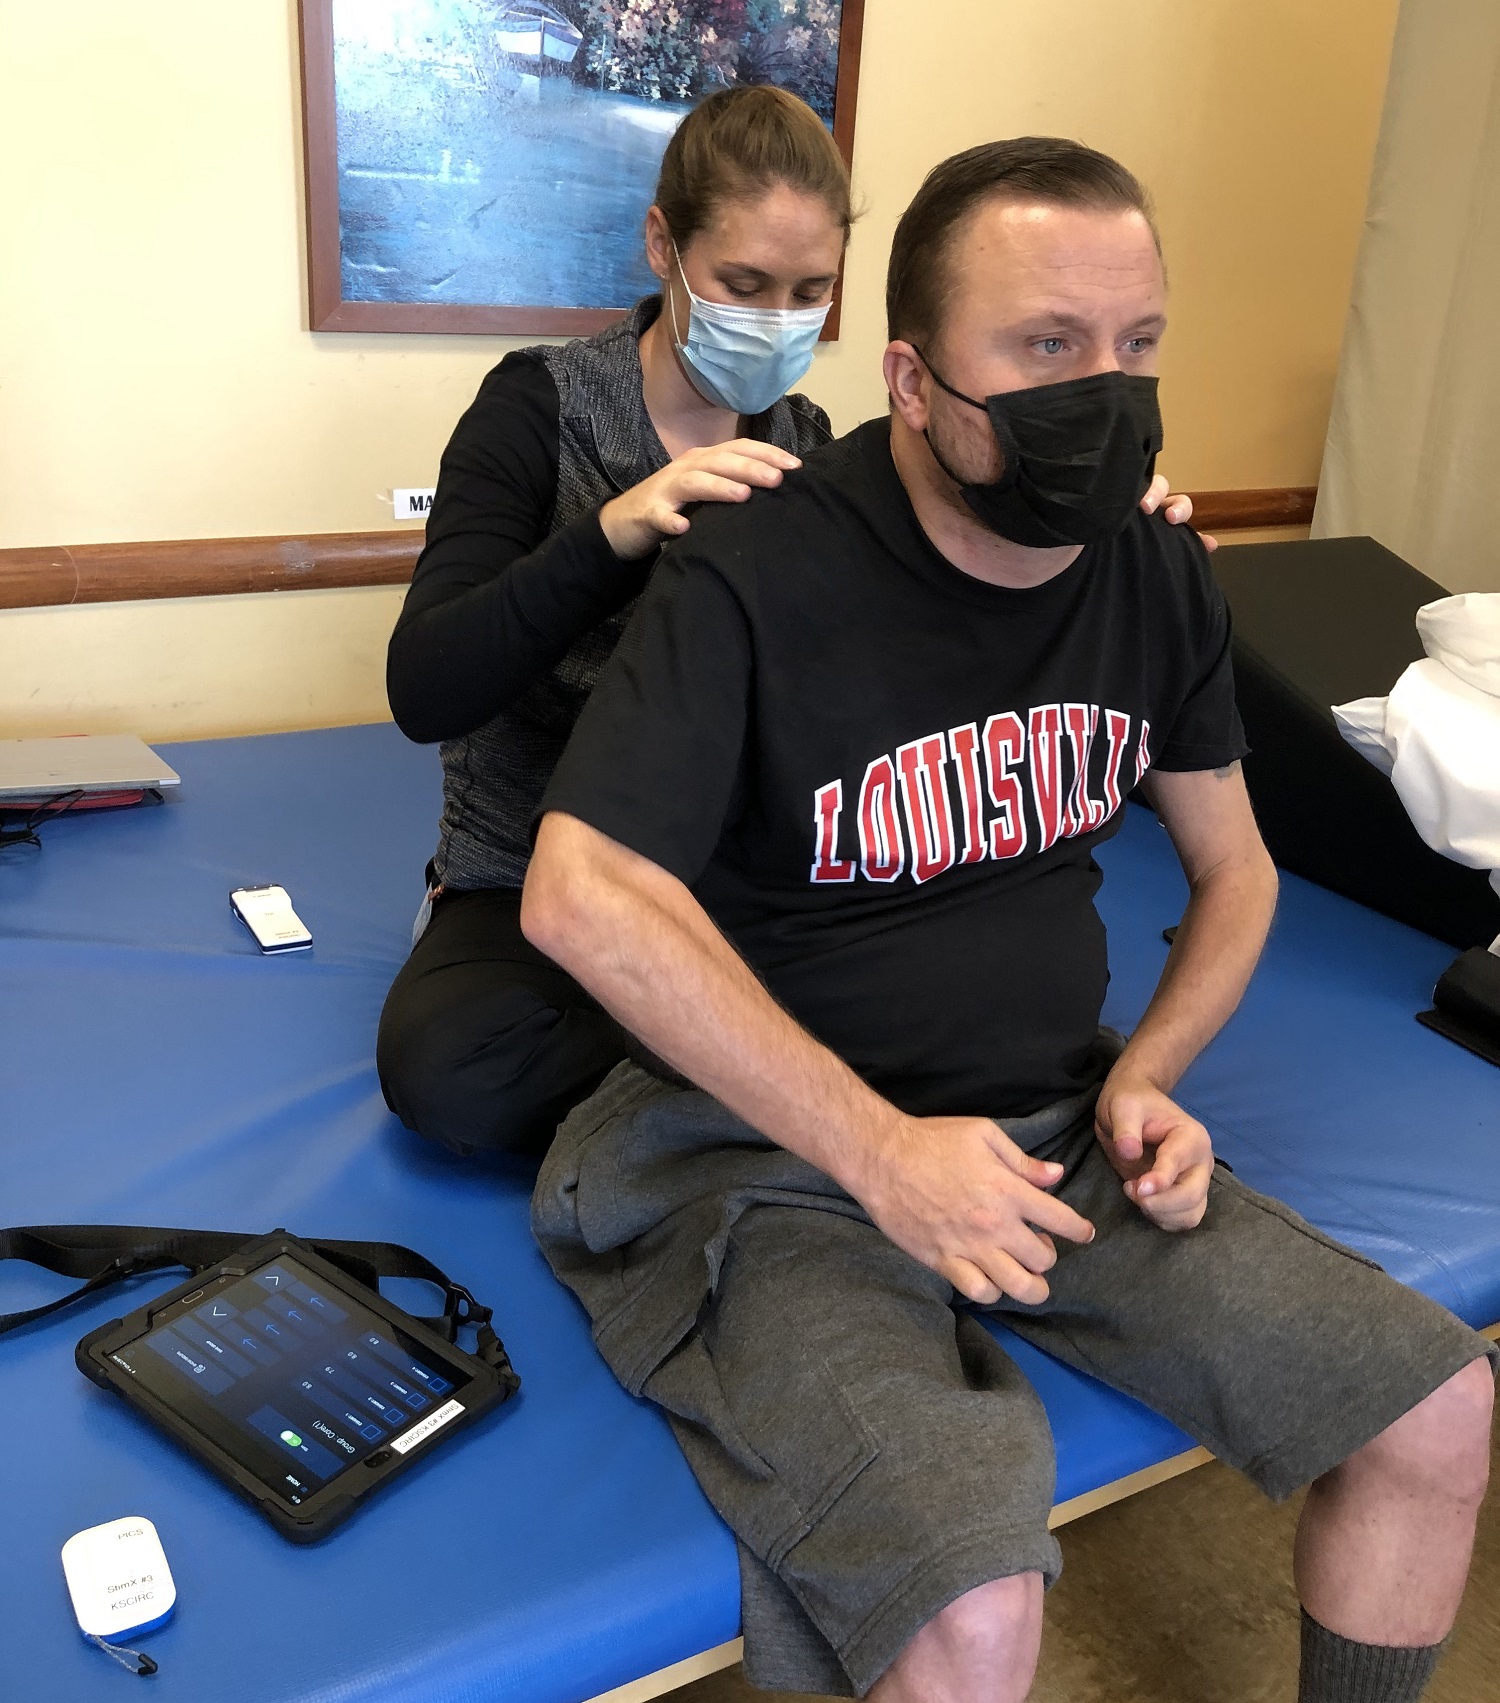 Keith Smith, UofL spinal cord research participant, with trainer Kristin Benton, working with the new tablet interface to control his Medtronic epidural stimulator